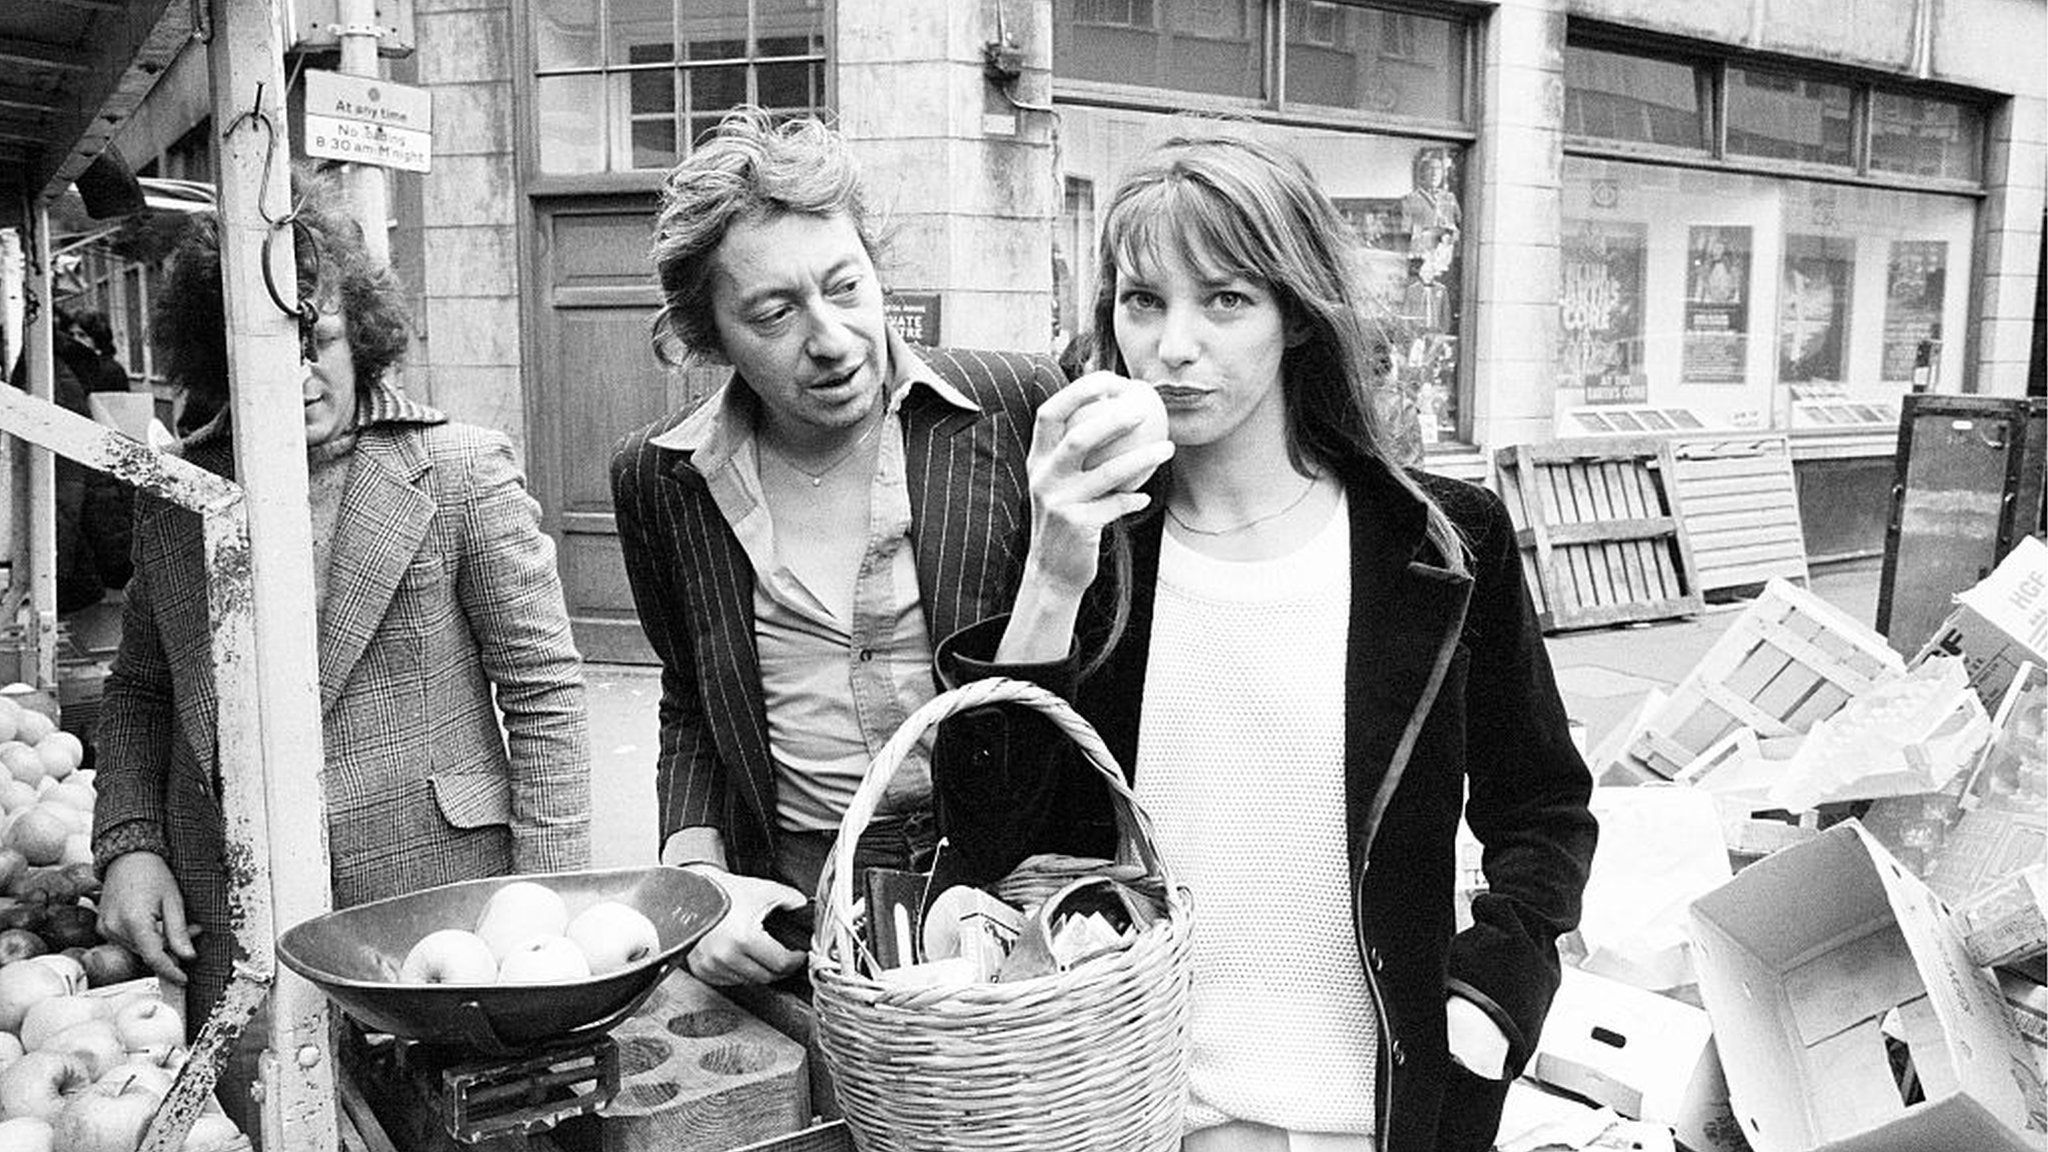 Jane Birkin: Singer and actress recovering from stroke - BBC News